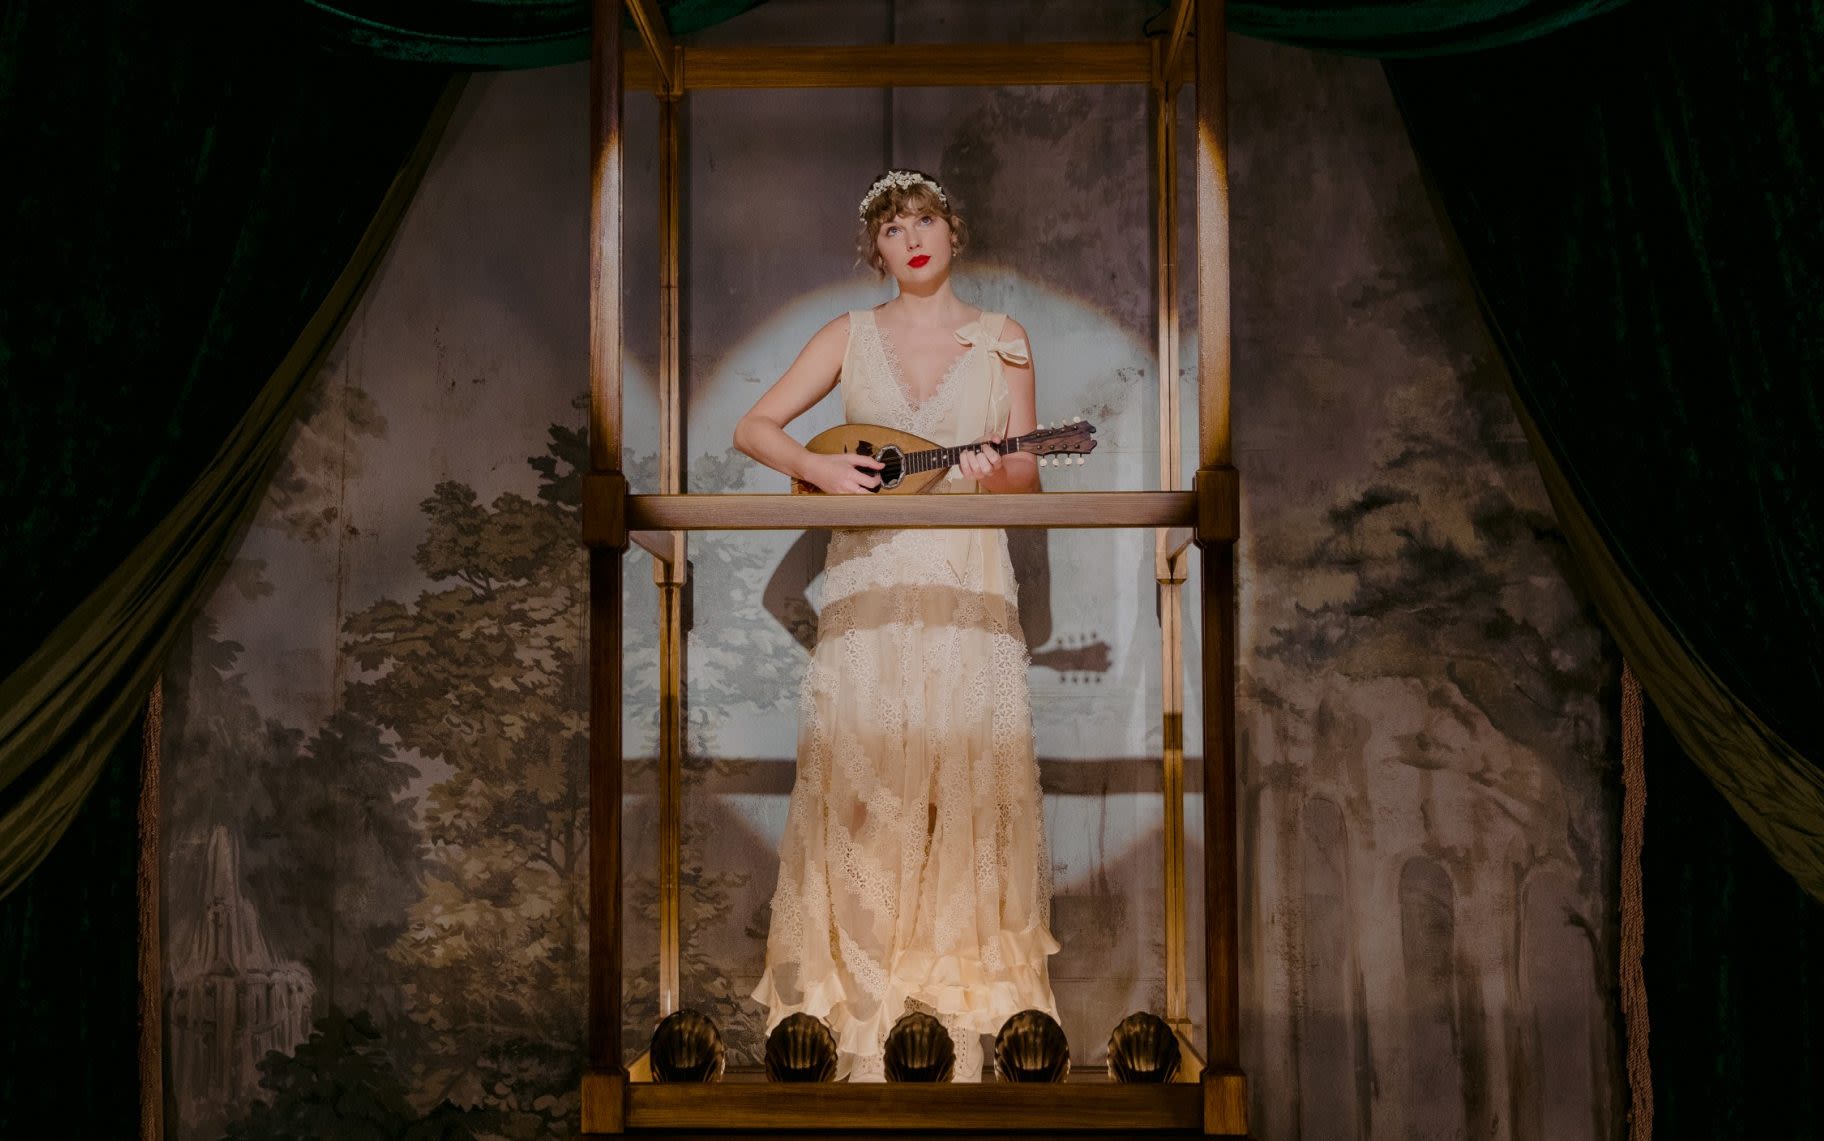 Taylor Swift: Songbook Trail, V&A: Brilliantly told chronicle of a life lived in the spotlight